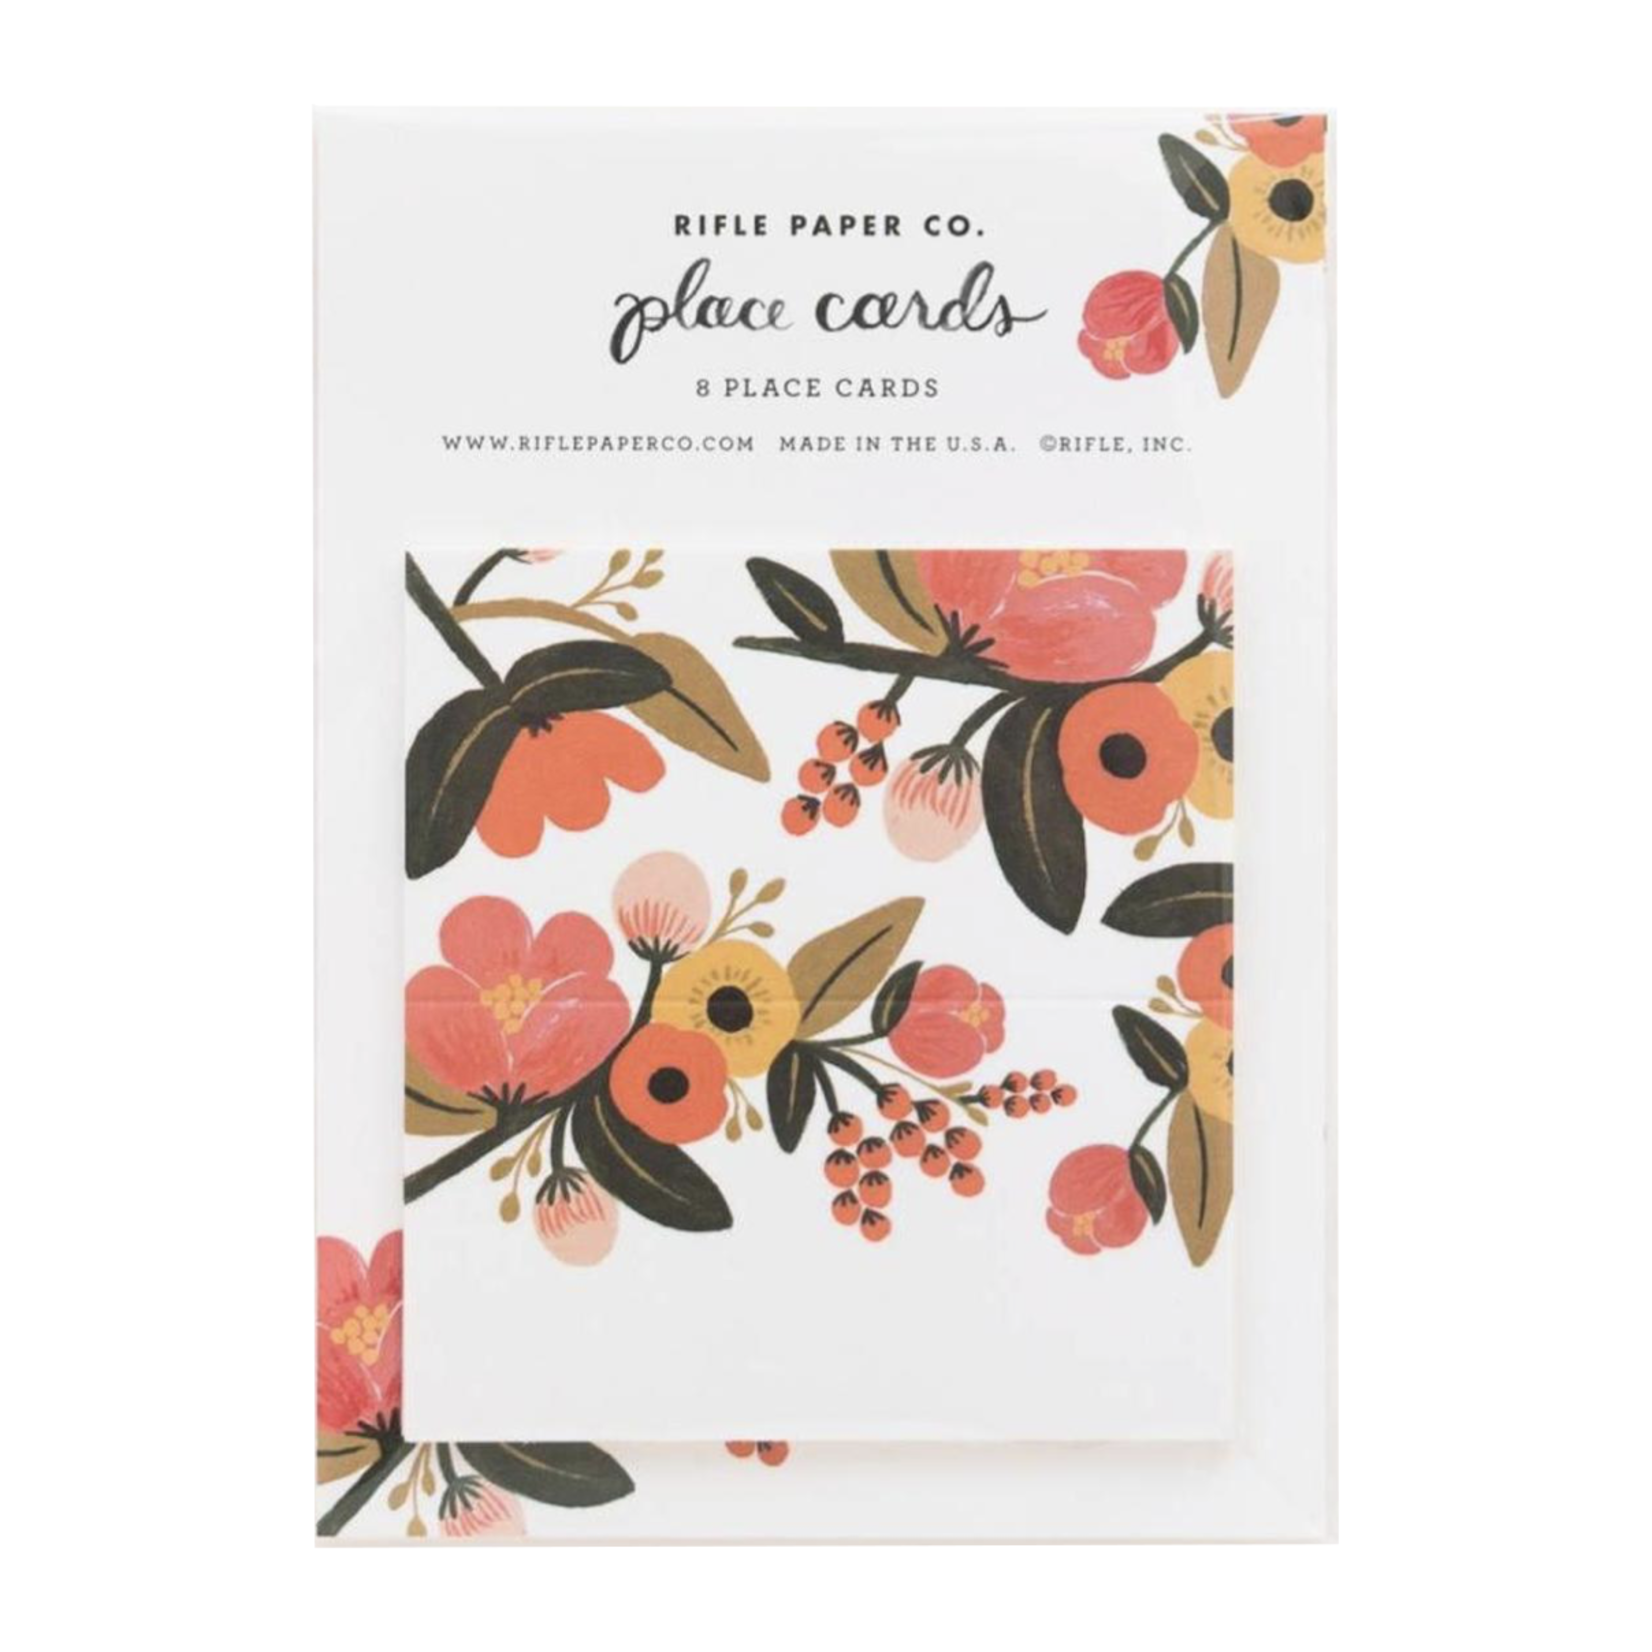 Rifle Paper Company Garden Place Cards - Set of 8